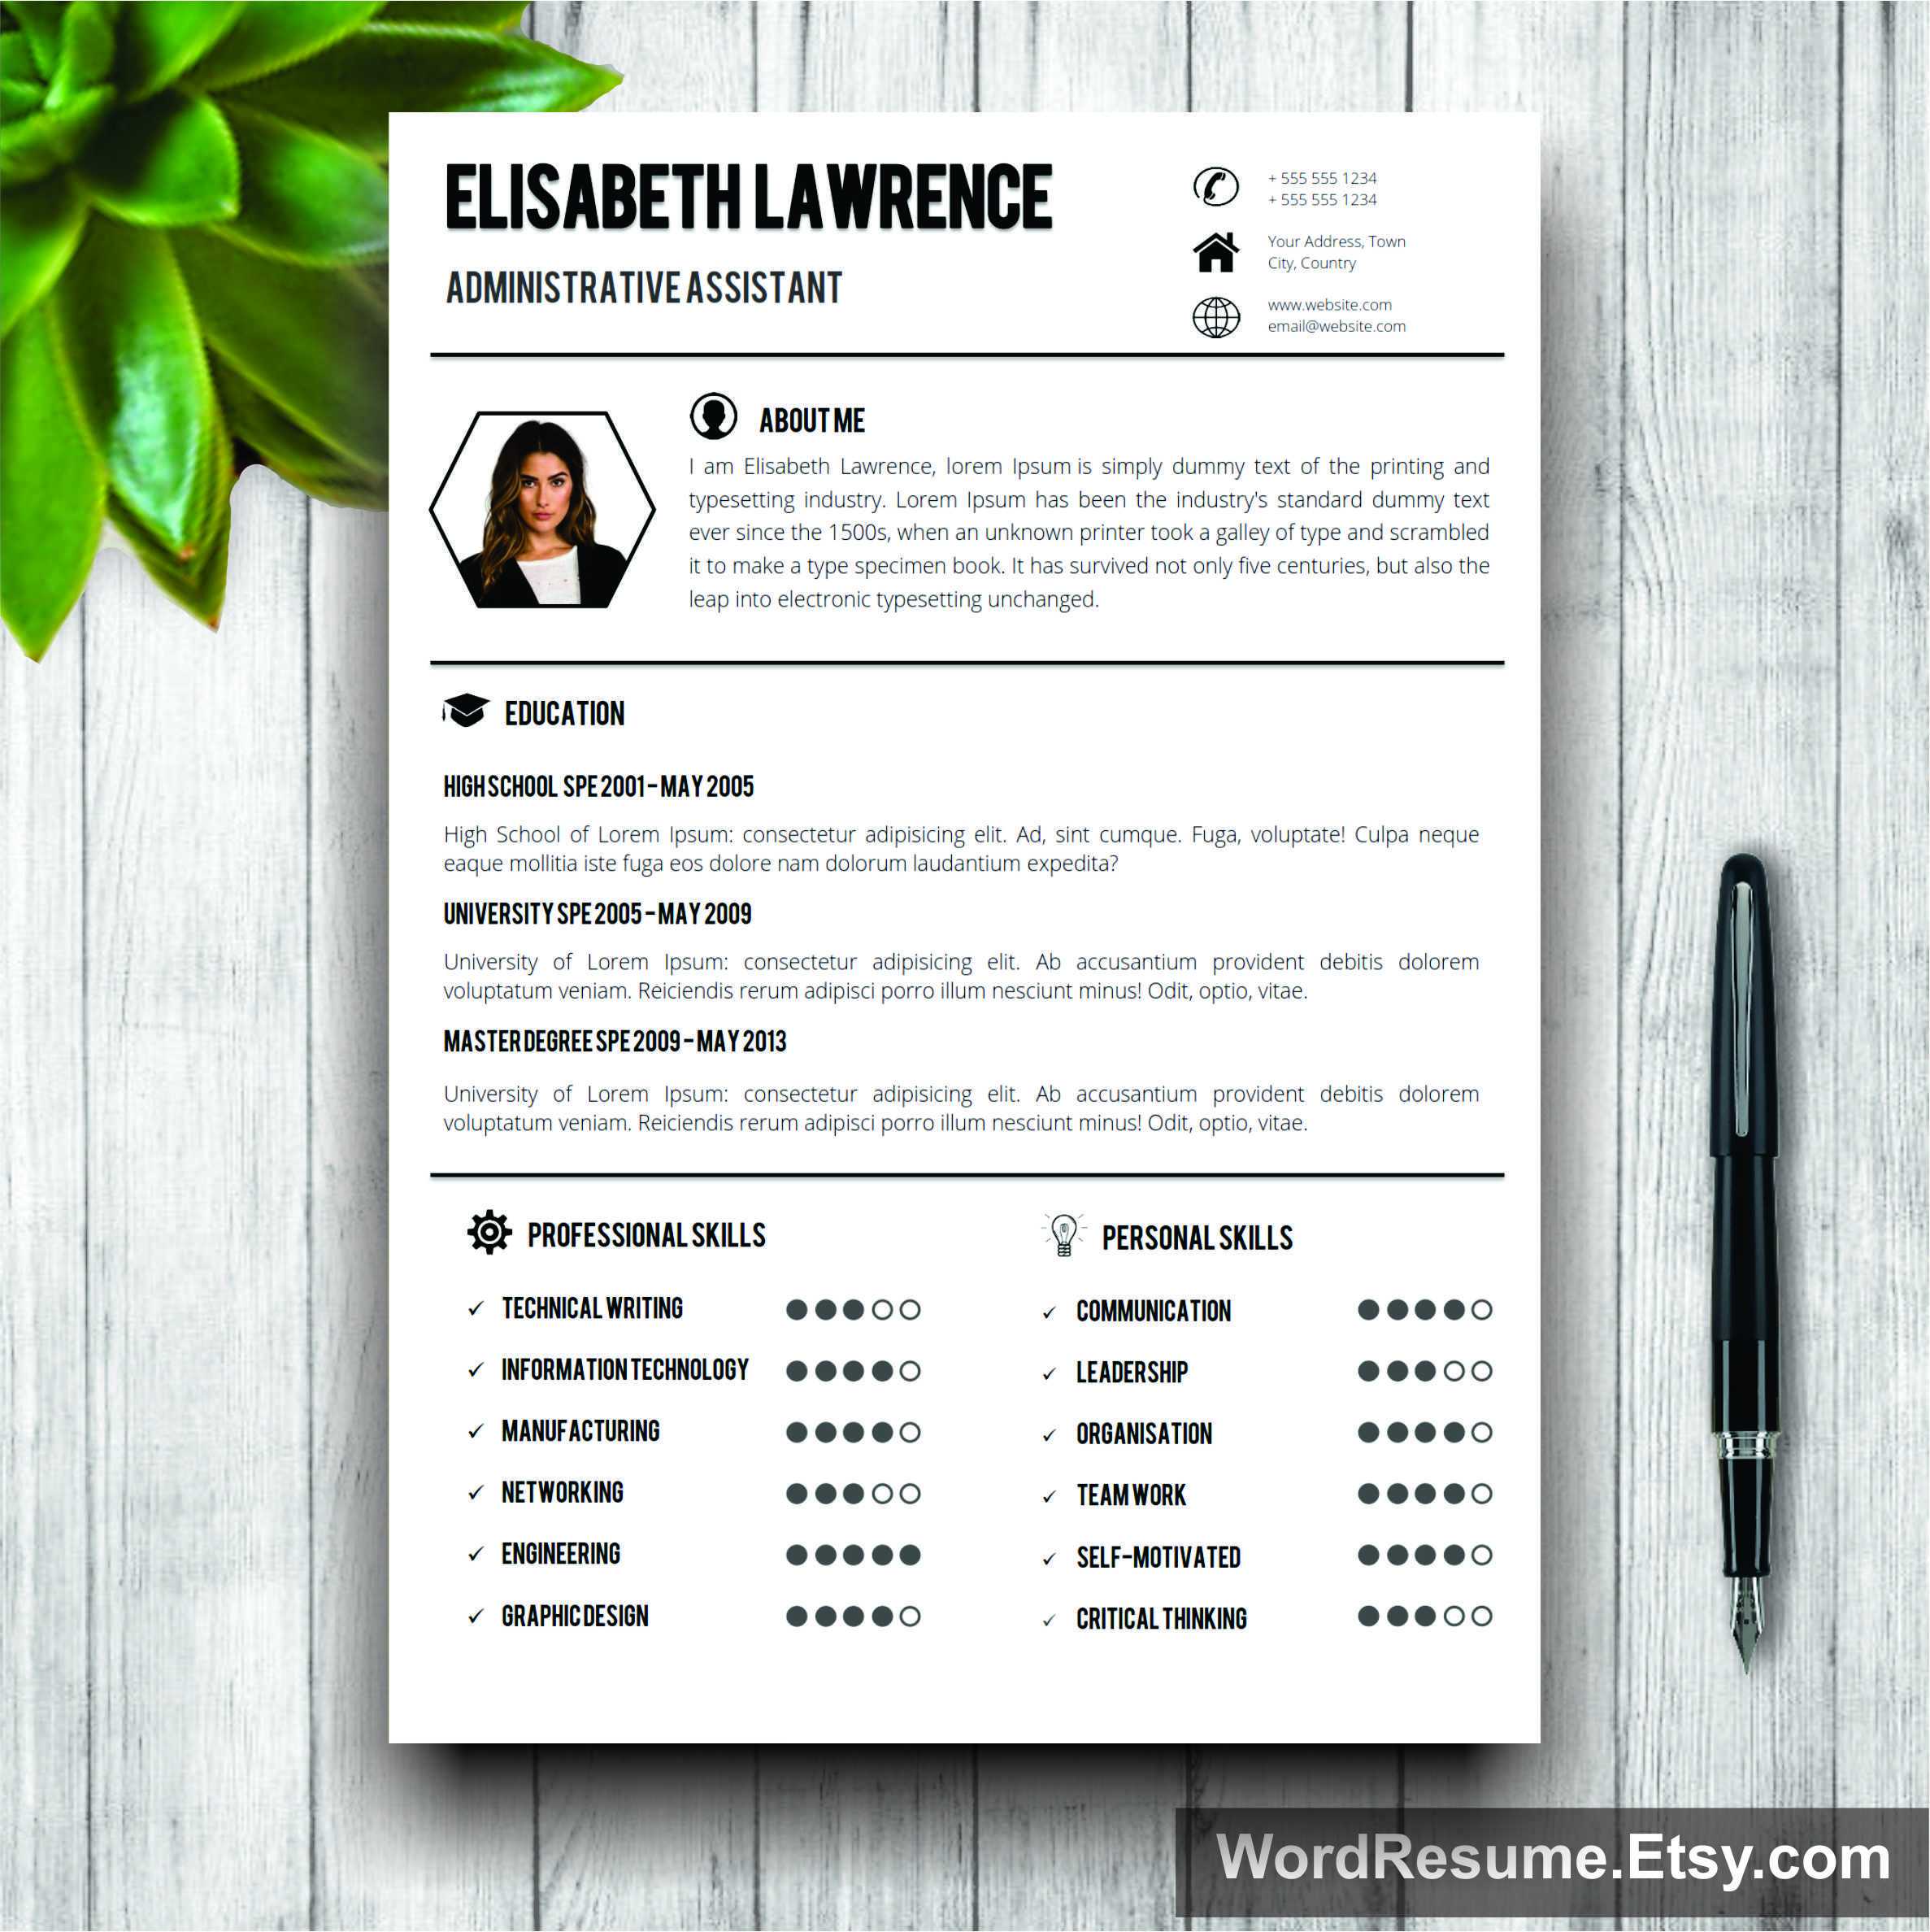 Word Resume Template With Photo – “Elisabeth Lawrence” Pertaining To Resume Templates Word 2007